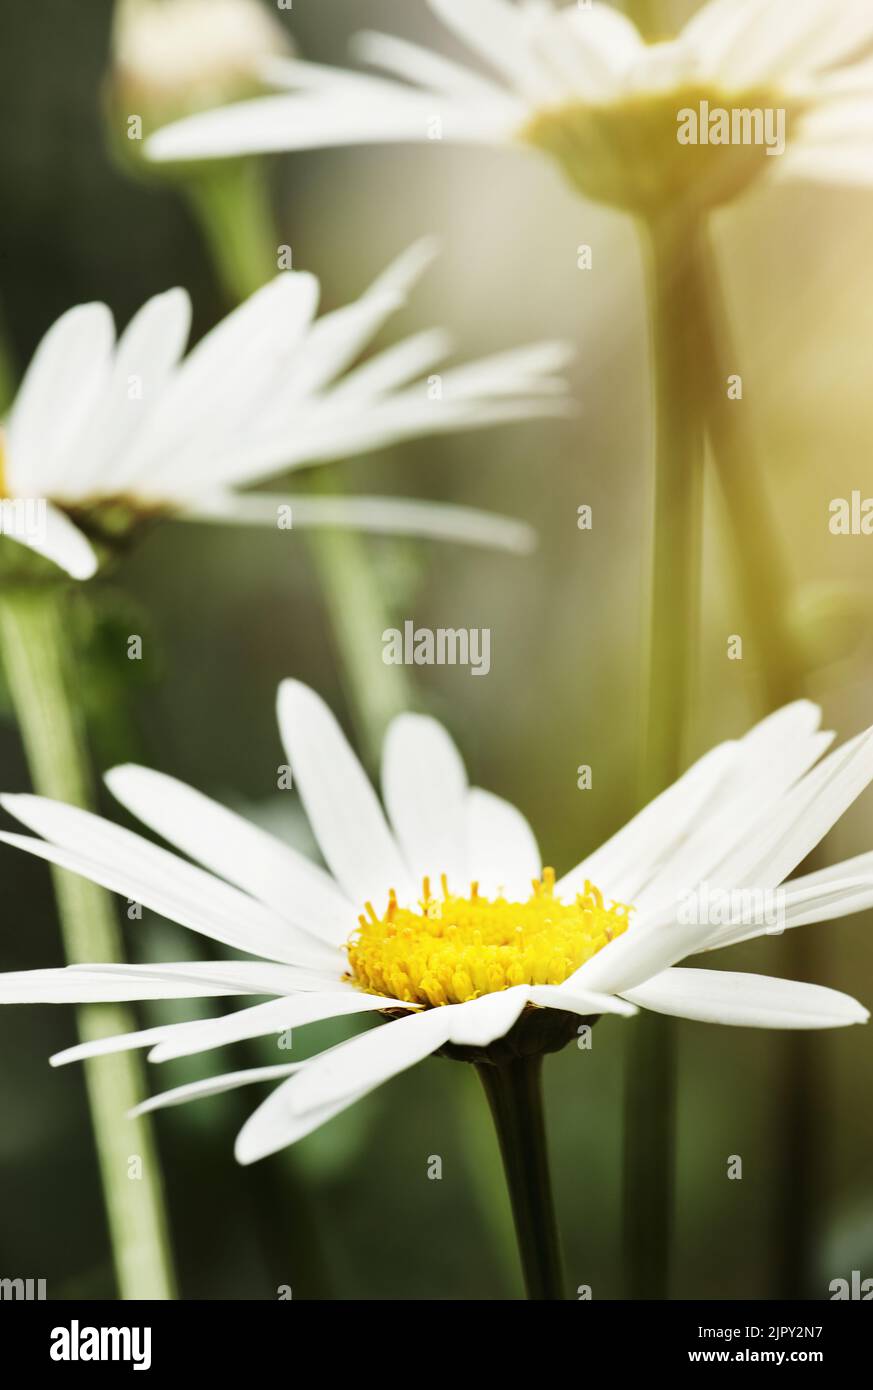 Blossoming beautifully. Still life shot of white daisies in bloom. Stock Photo